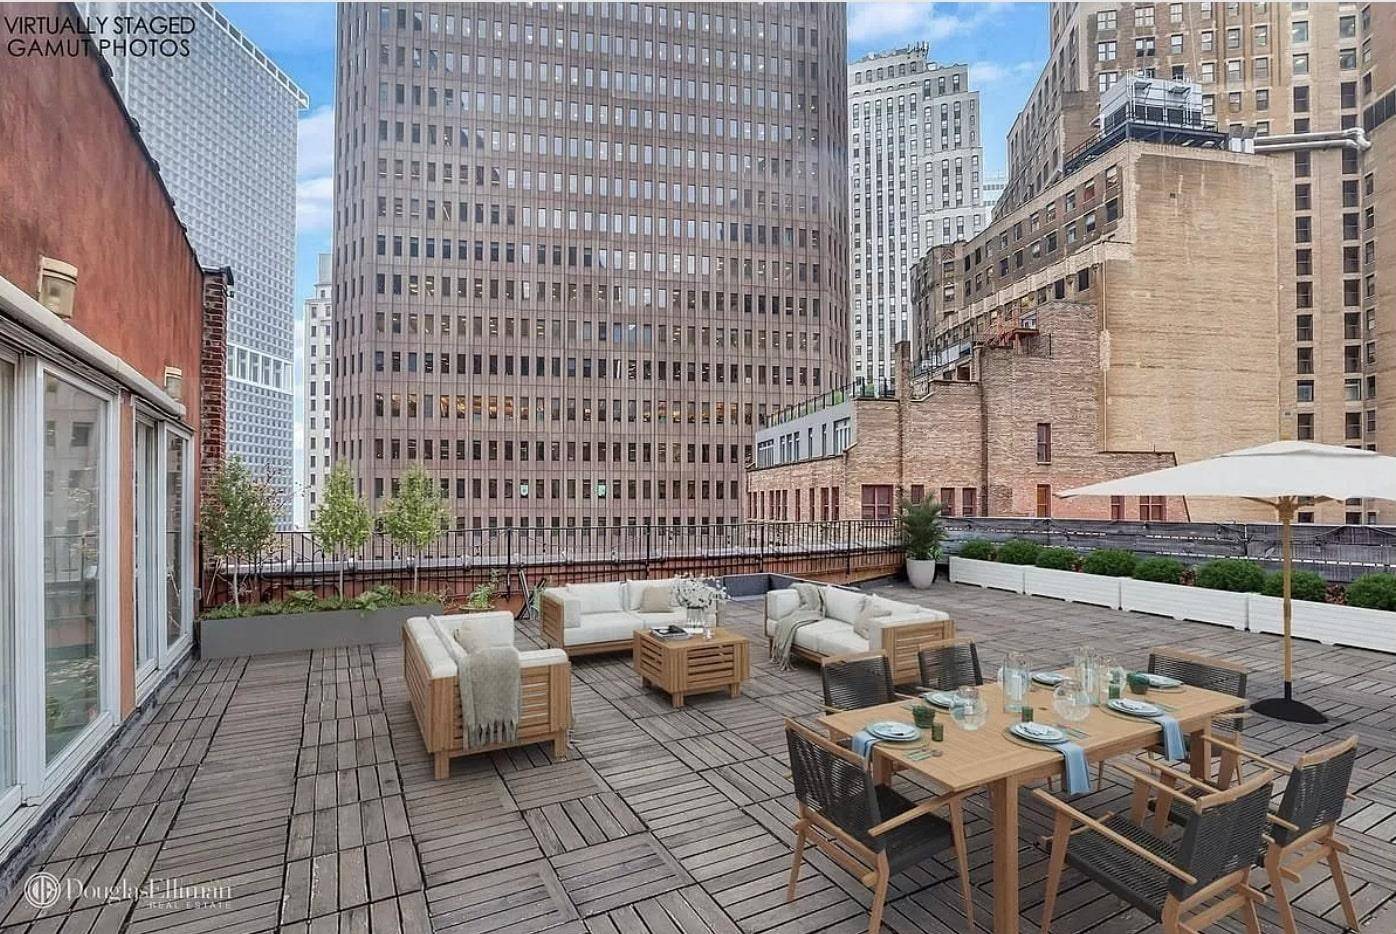 Welcome to The Penthouse Duplex at 54 Stone Street Condominium, an ENORMOUS Open Duplex Loft with OVER 4800 SF of living space spanning over two levels with PHENOMENAL PRIVATE OUTDOOR ...